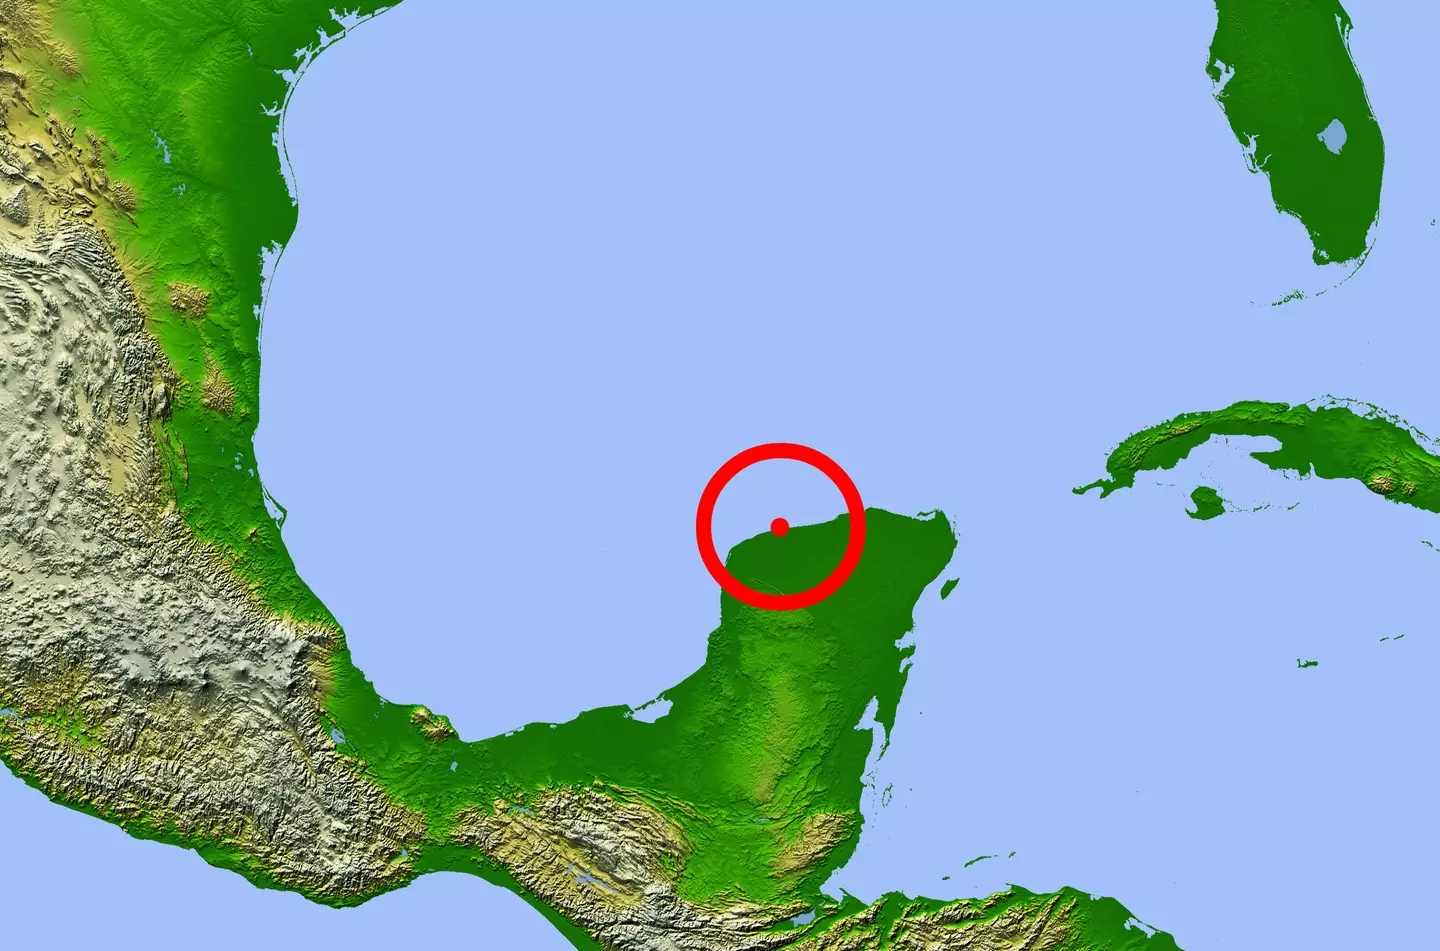 The location of the Chicxulub crater.